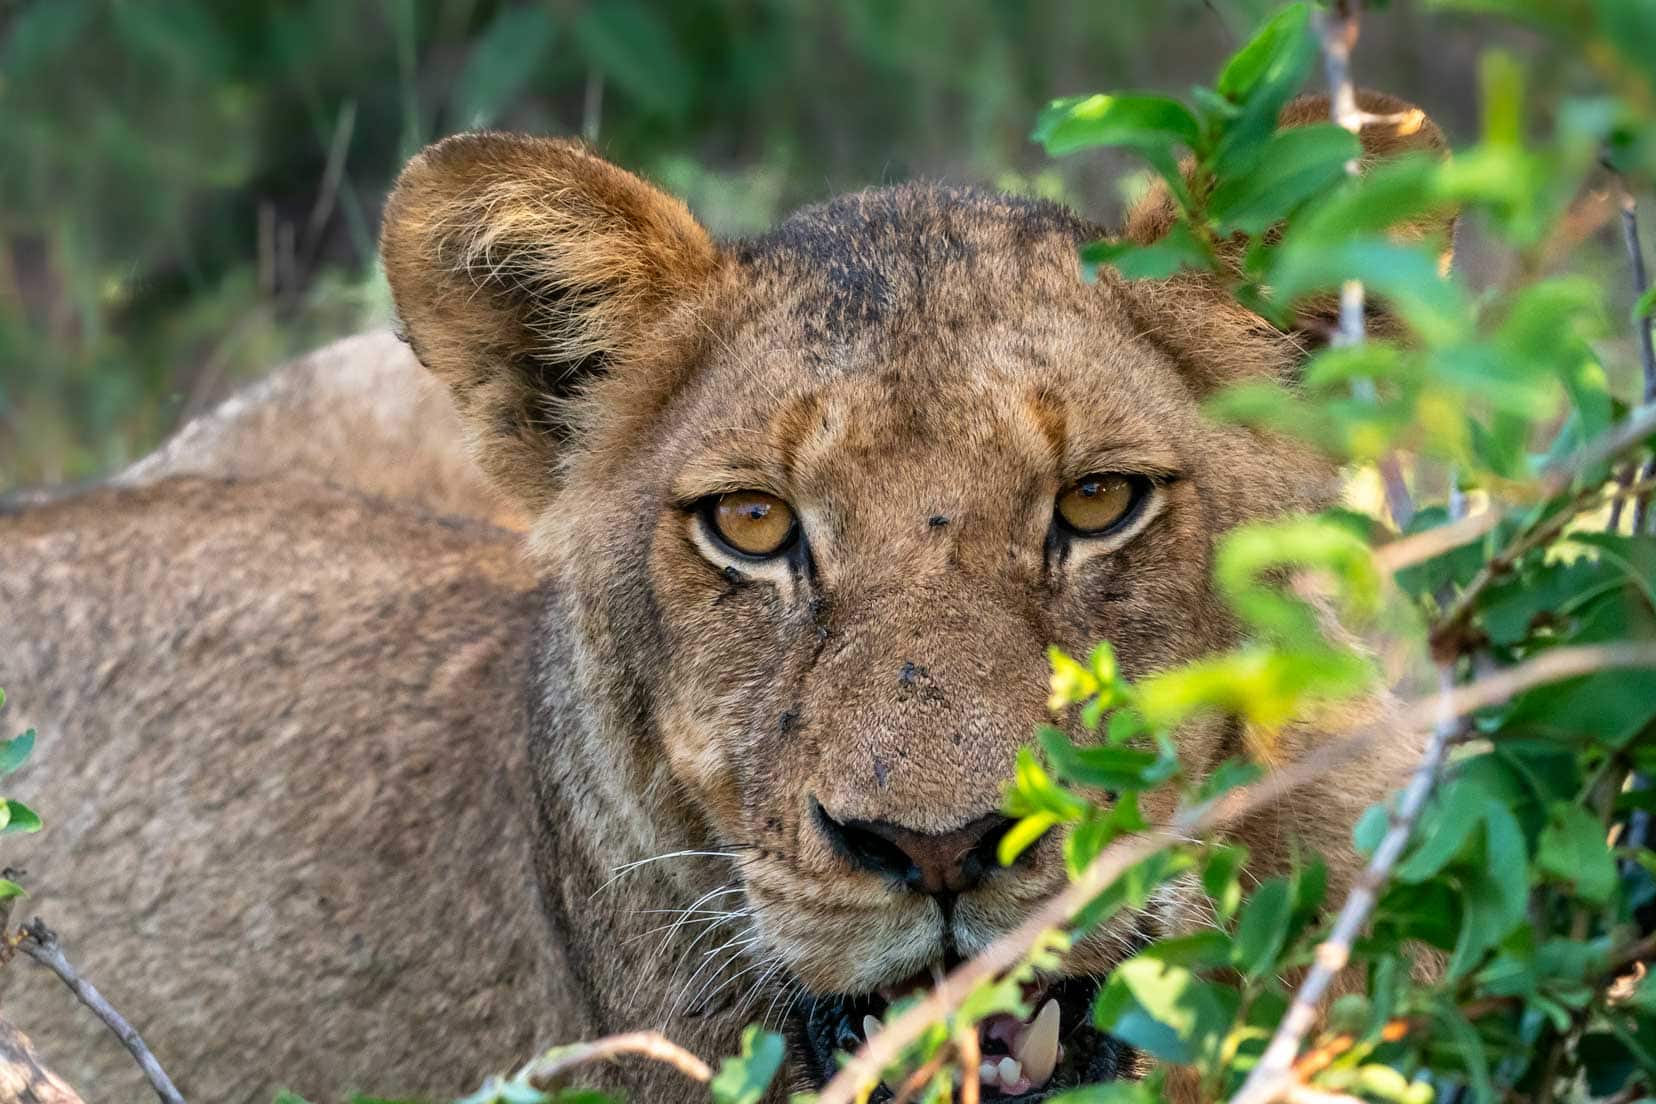 Lioness giving a hard stare at camera in Kruger